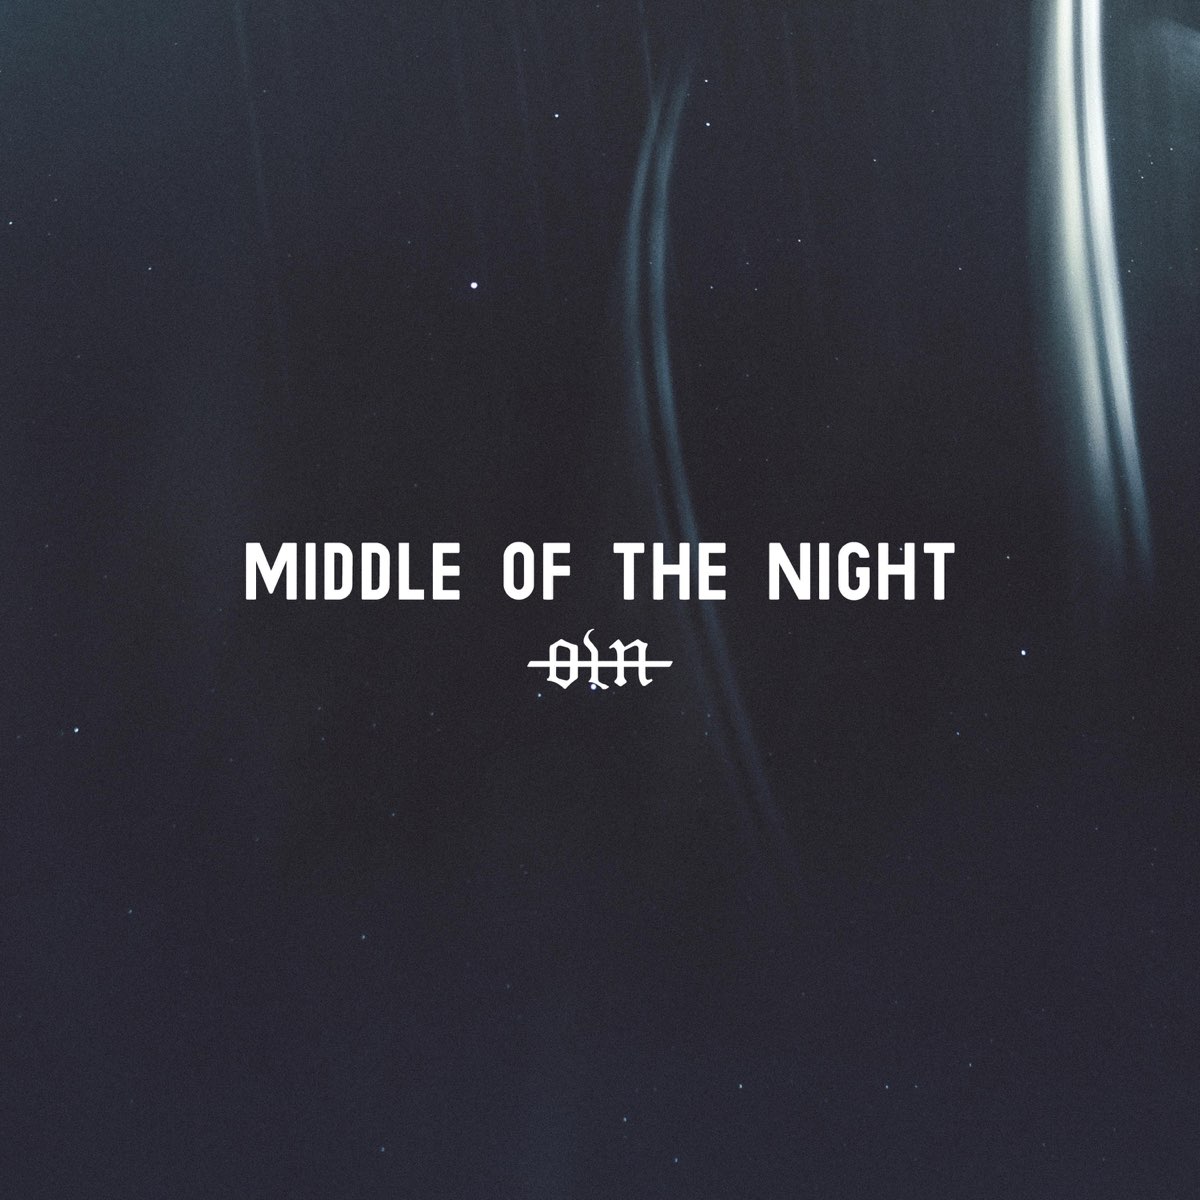 Middle of the night mp3. Элли Дуэ Middle of the Night. Middle of the Night обложка. Middle of the Night текст. Middle of the Night Elley Duhé текст.